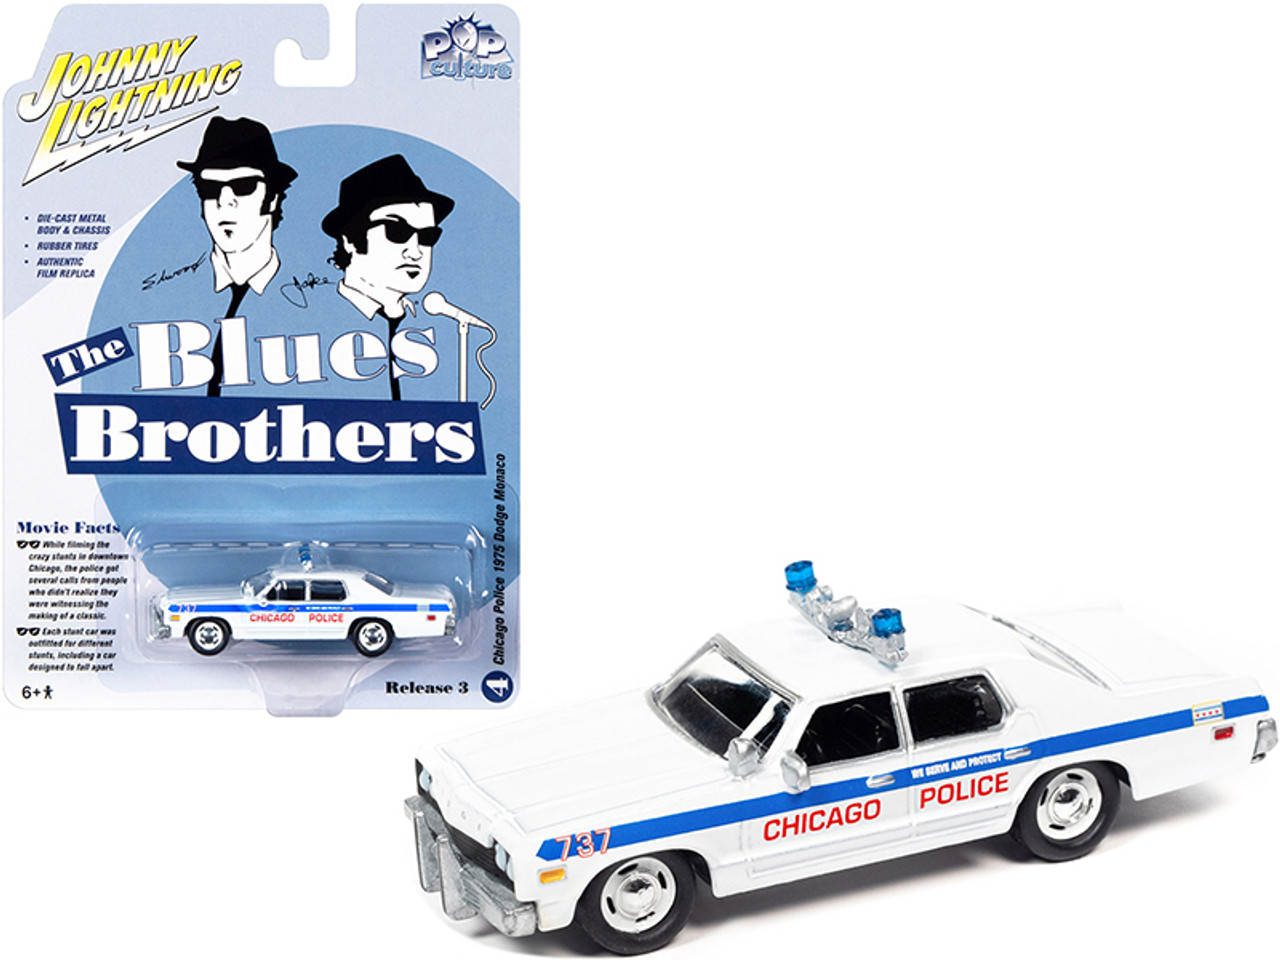 1975 Dodge Monaco White with Blue Stripes "Chicago Police Department" "The Blues Brothers" (1980) Movie "Pop Culture" Series 3 1/64 Diecast Model Car by Johnny Lightning